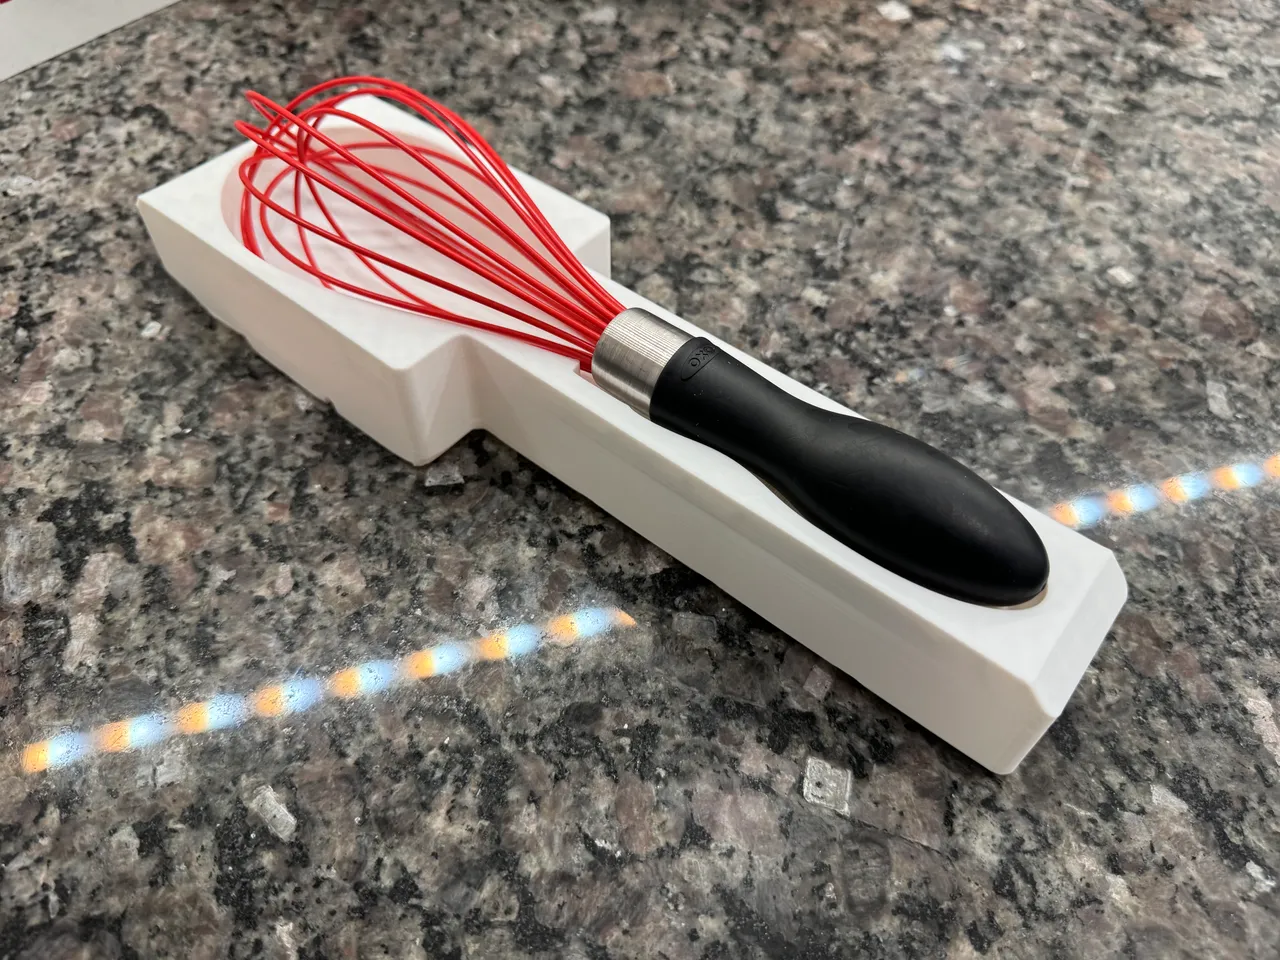 Gridfinity Bin for Oxo 11 Silicone Balloon Whisk by BombadBrad